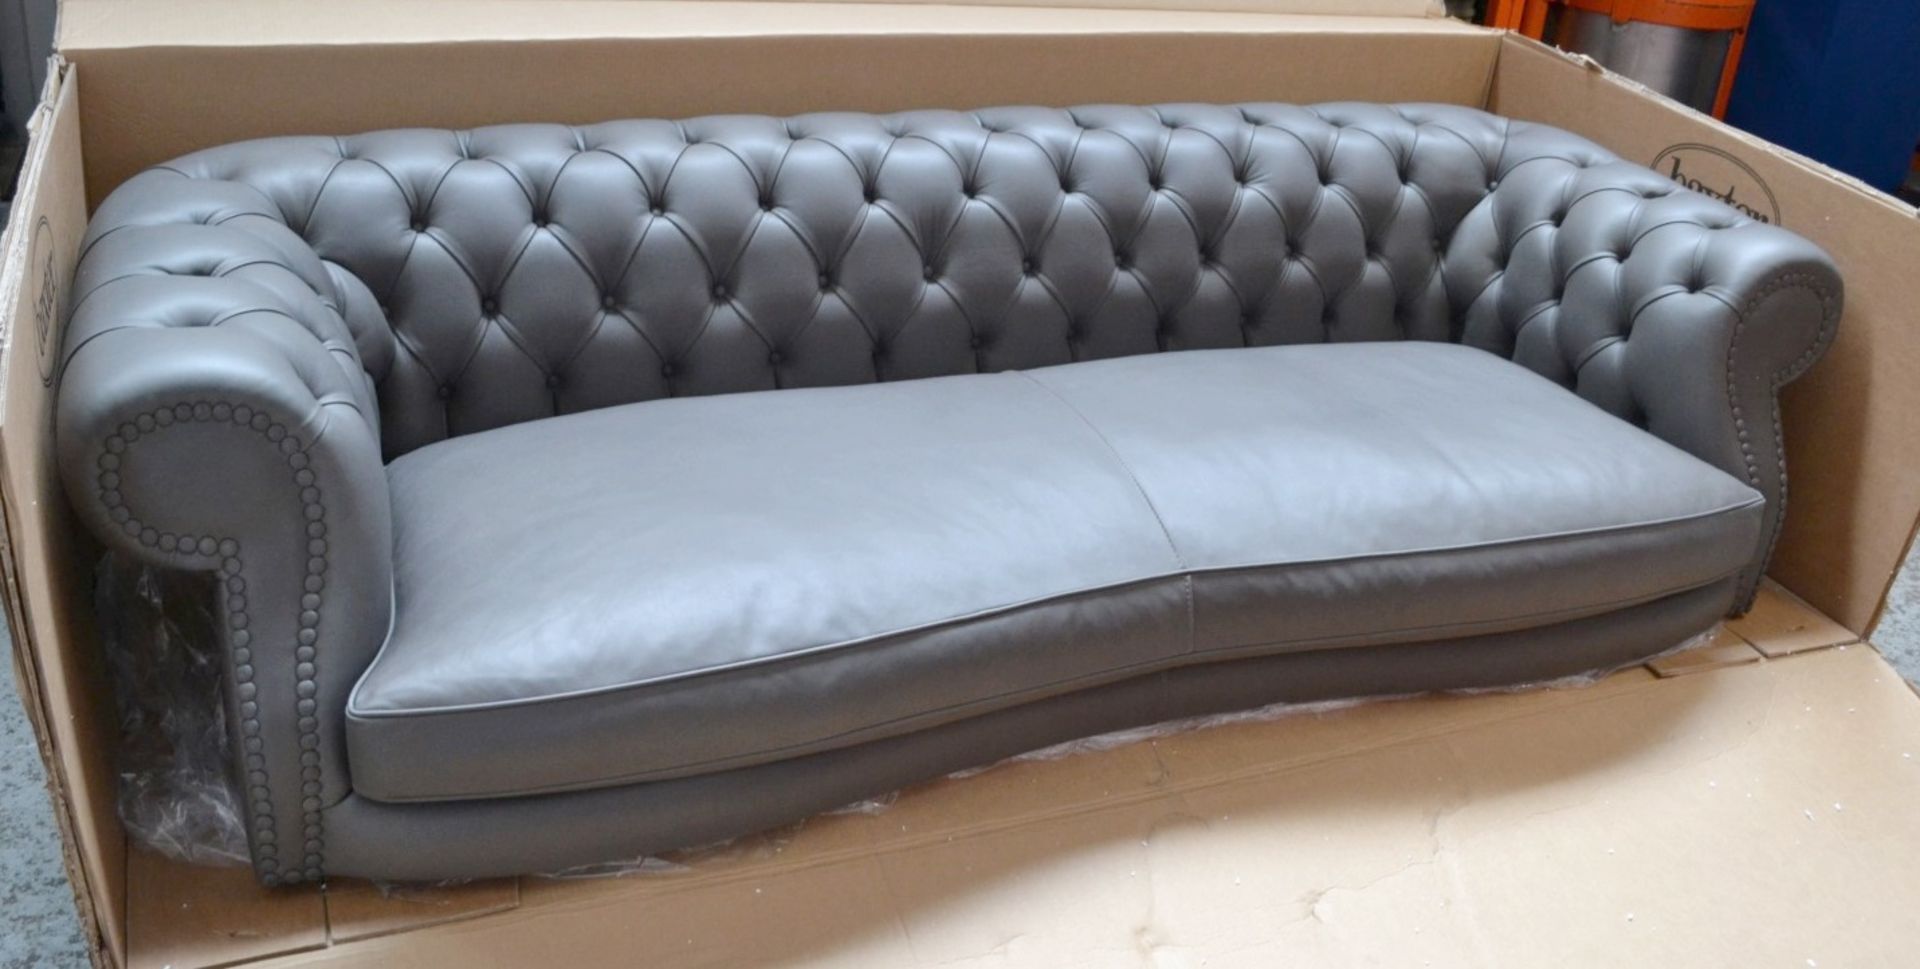 1 x BAXTER Diana Chester Sofa Upholstered In A Rich Grey Leather - Italian Made - Dimensions: - Image 2 of 7